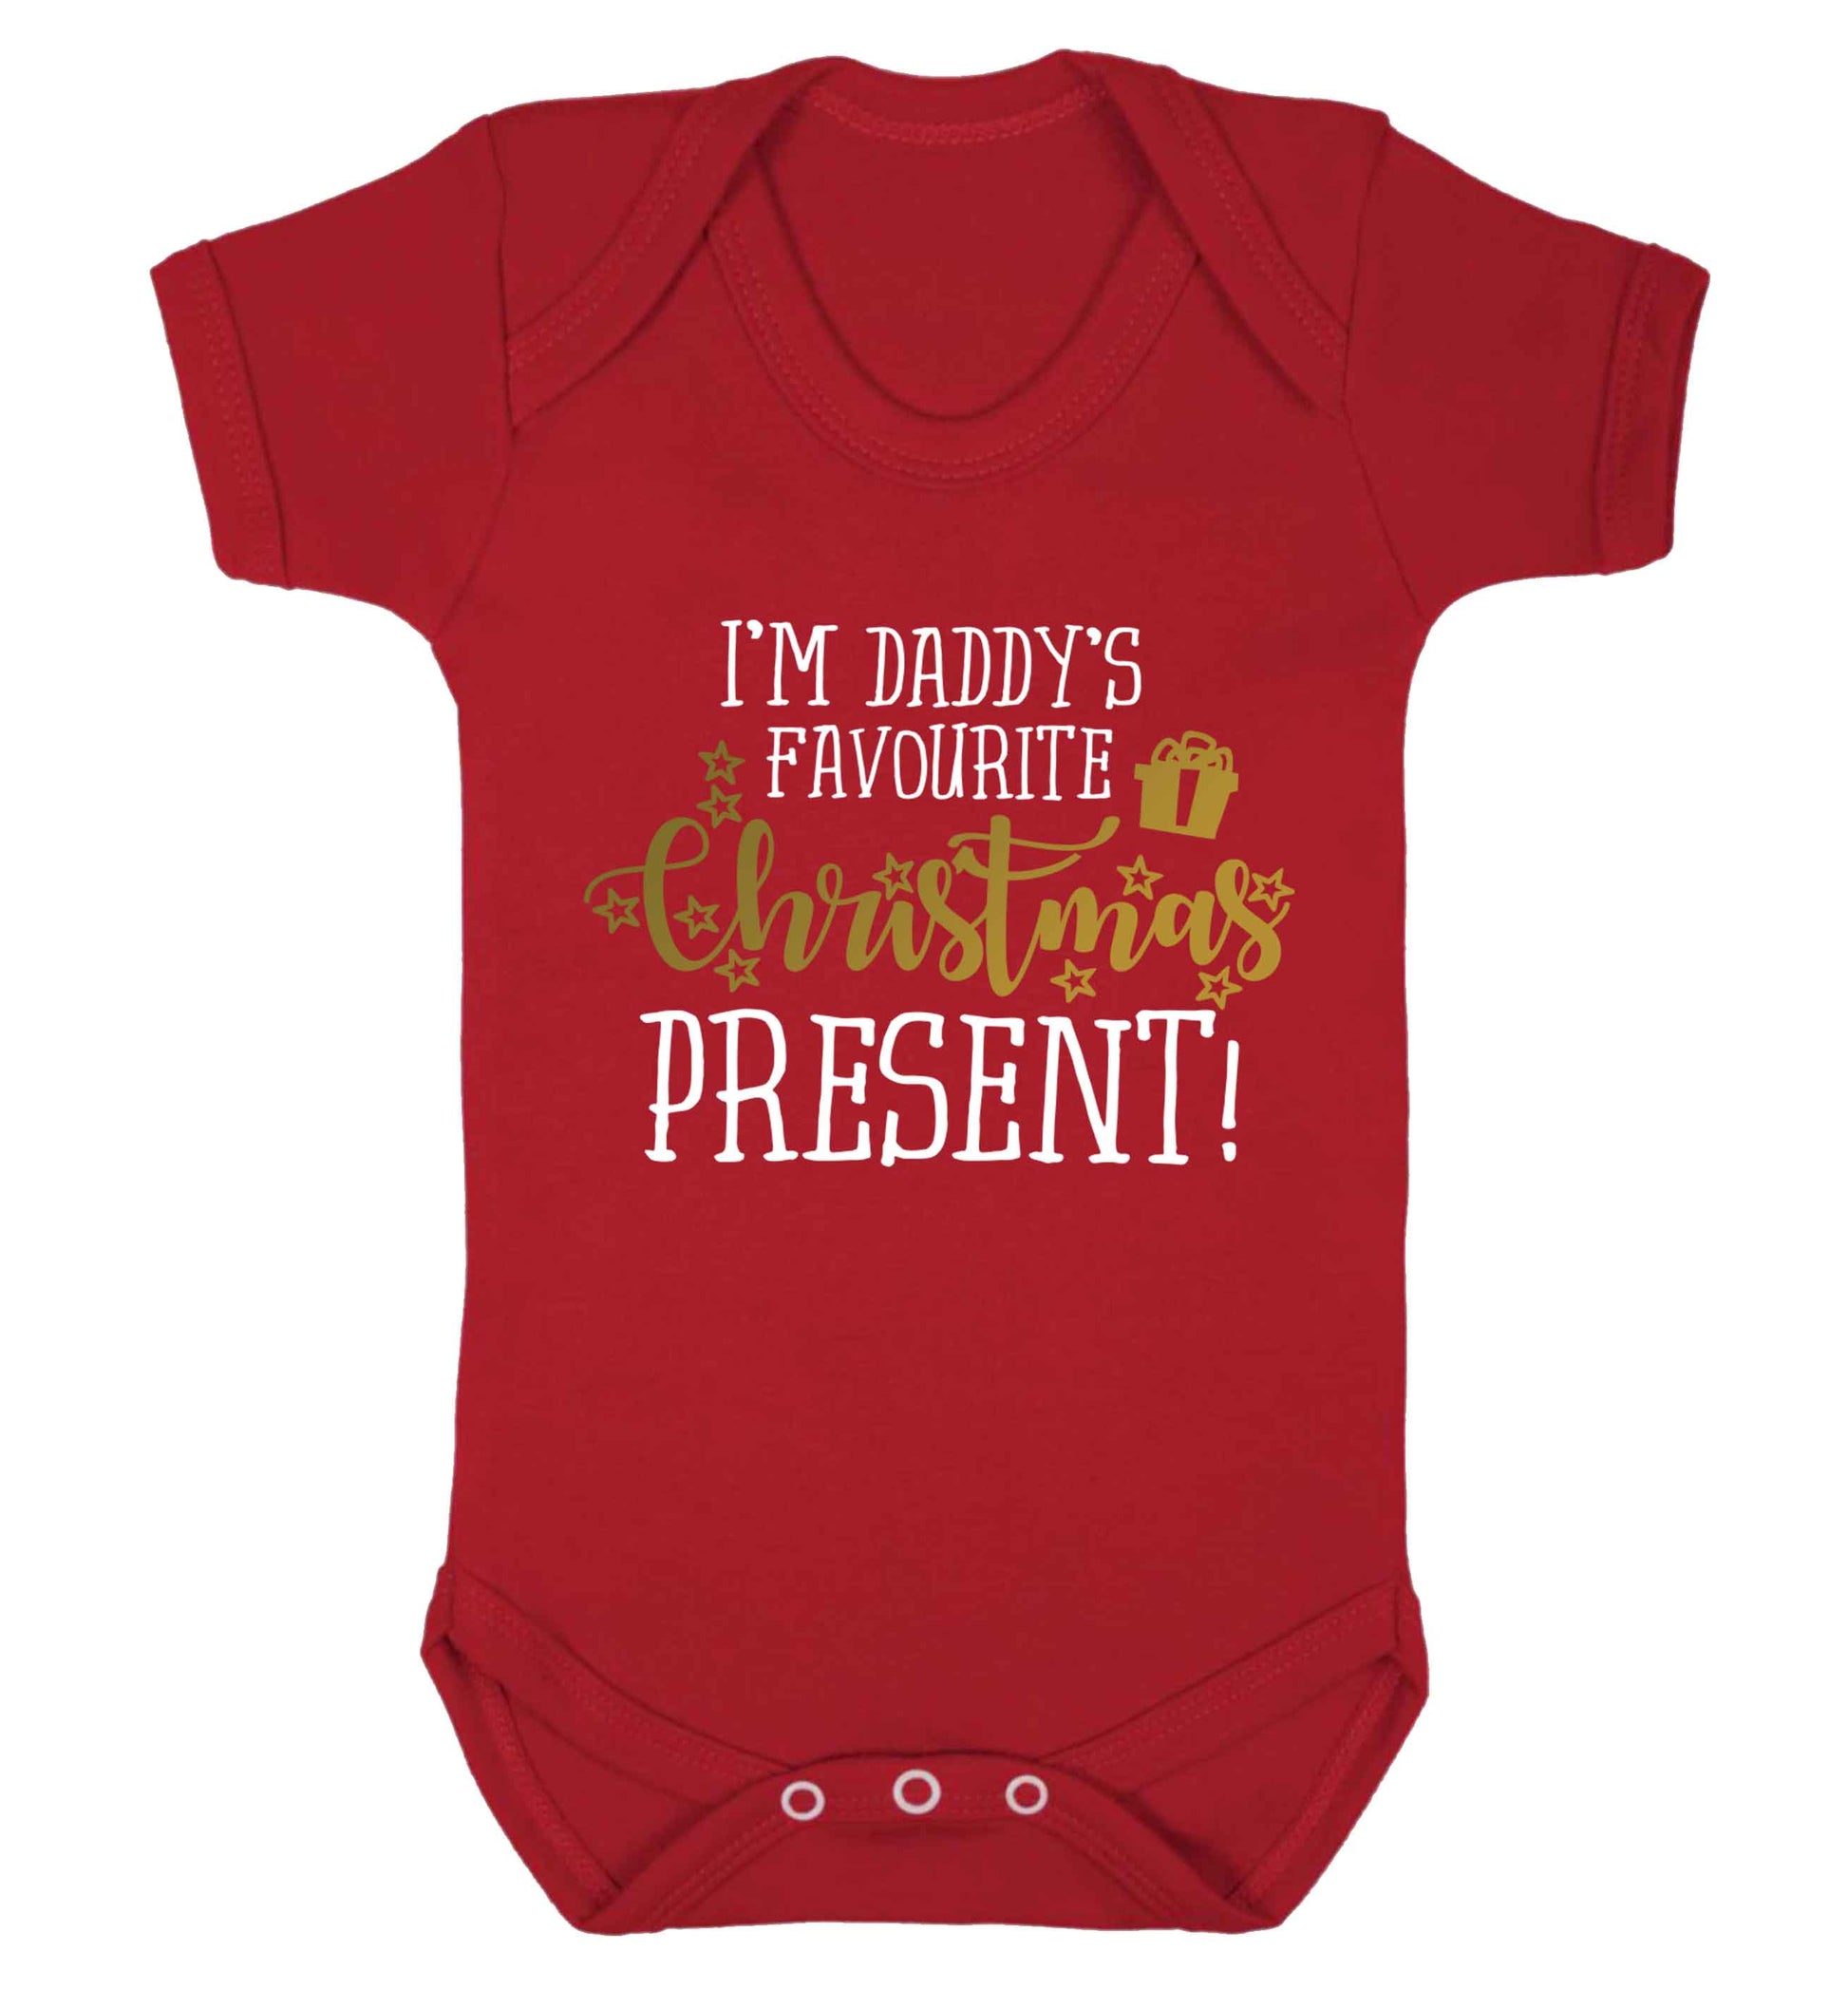 Daddy's favourite Christmas present Baby Vest red 18-24 months